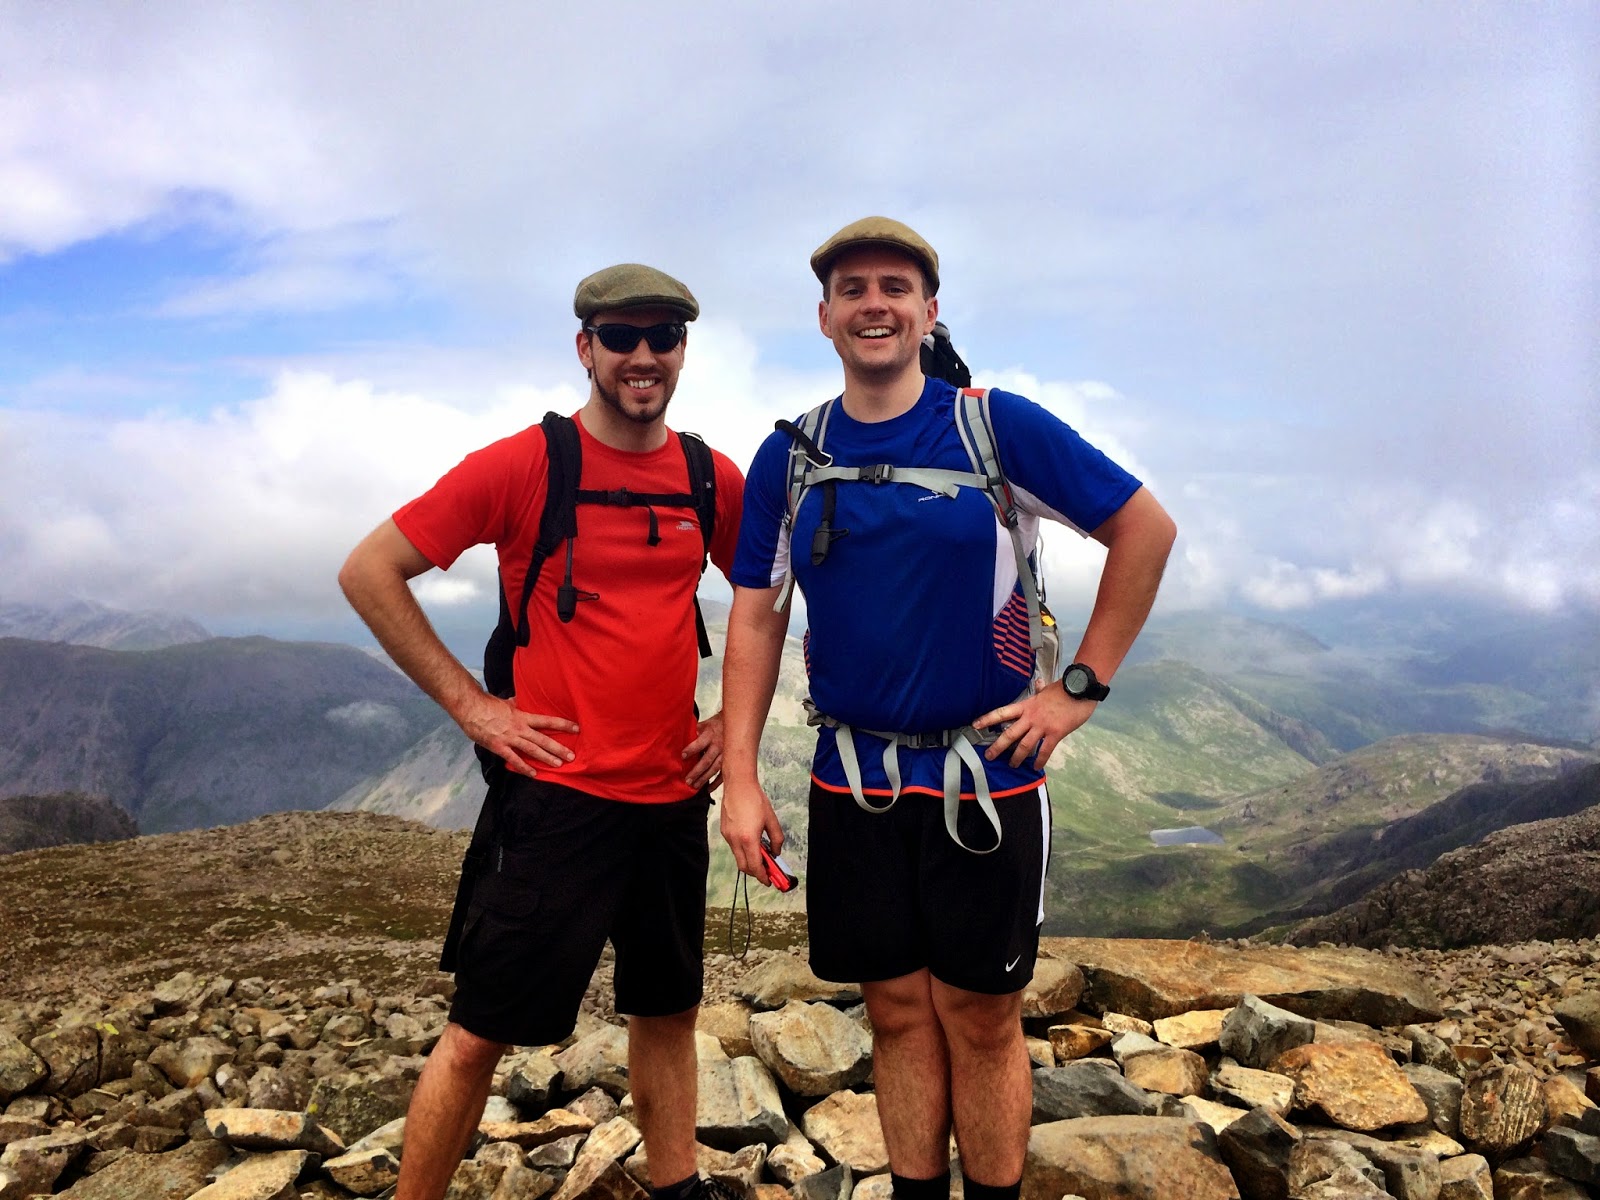 Mark and Simon at the summit of Scafell Pike - 24 peaks challenge